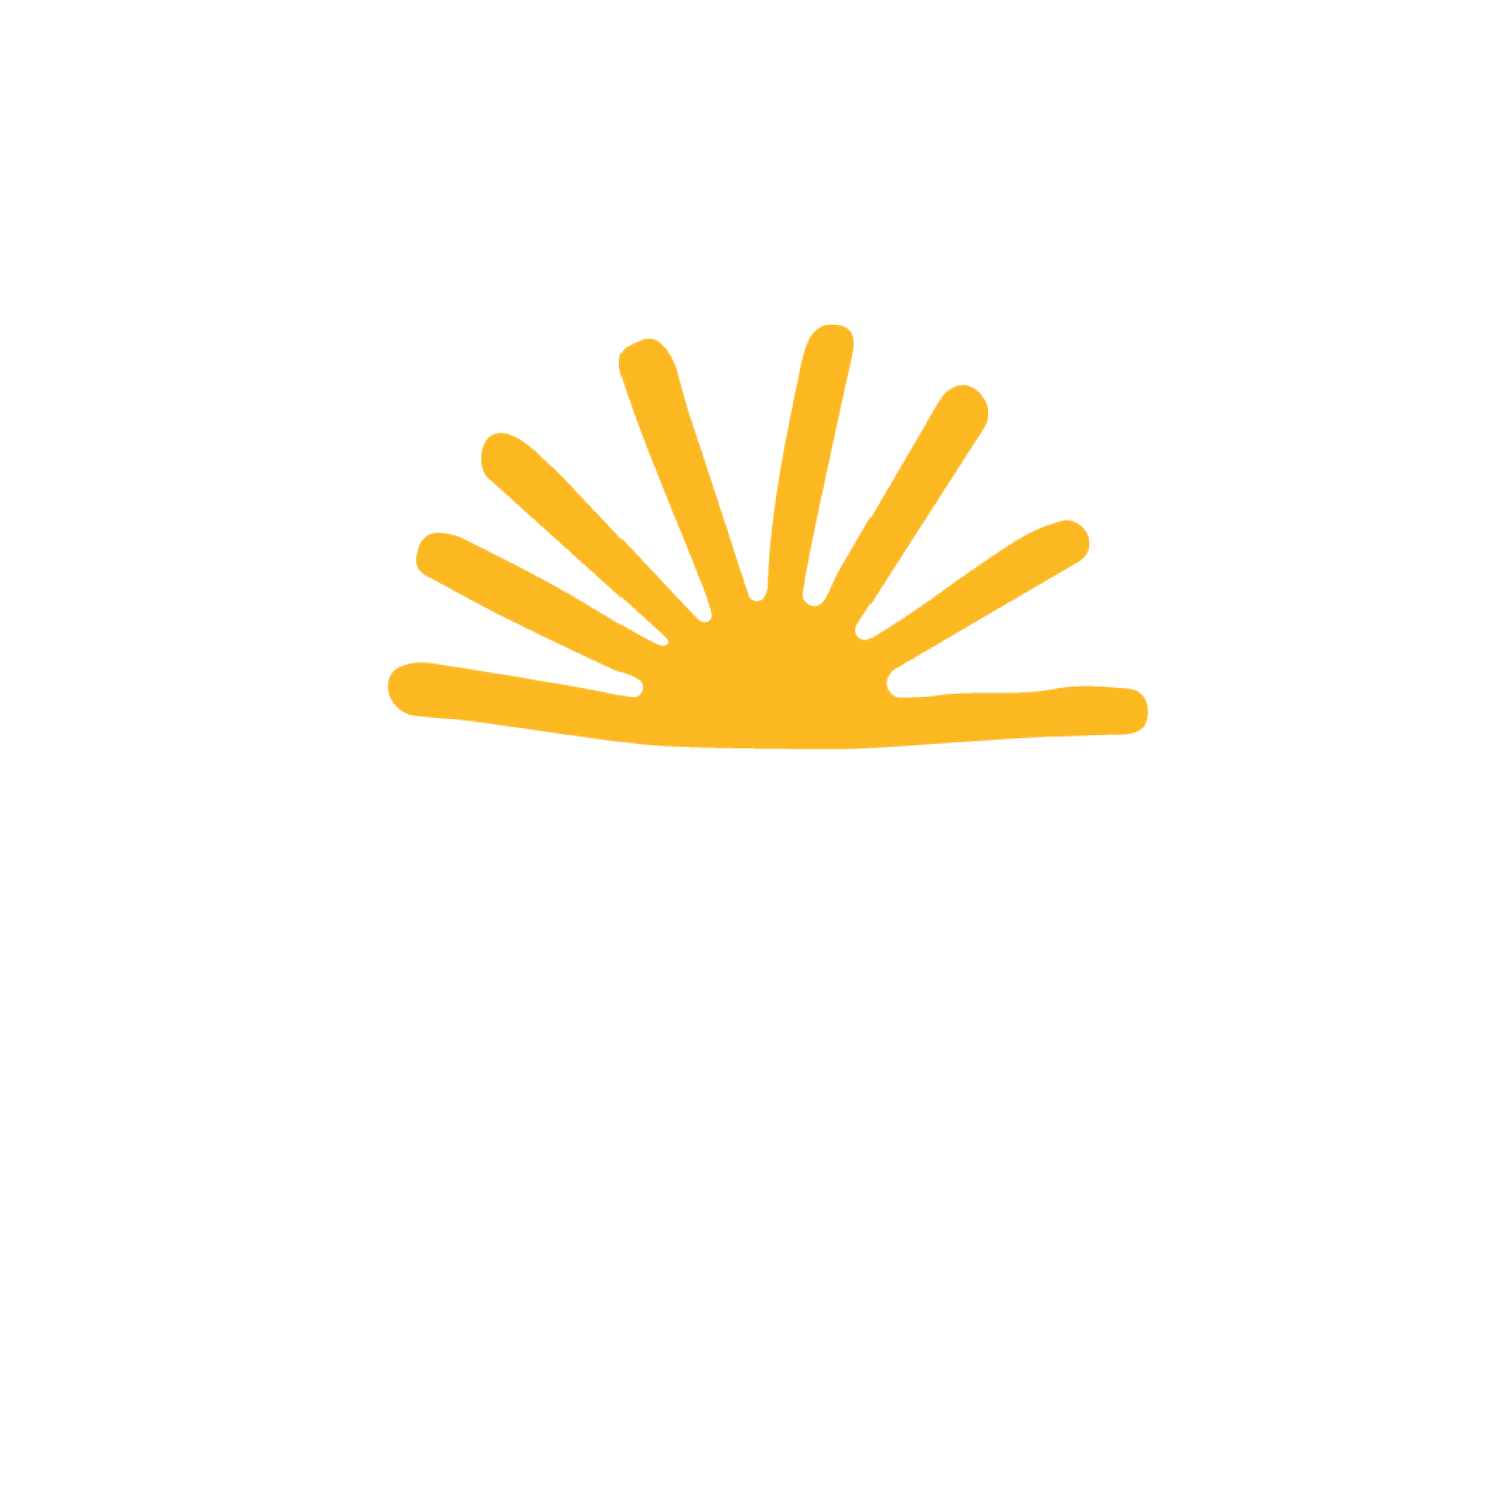 Better Days Dog Rescue